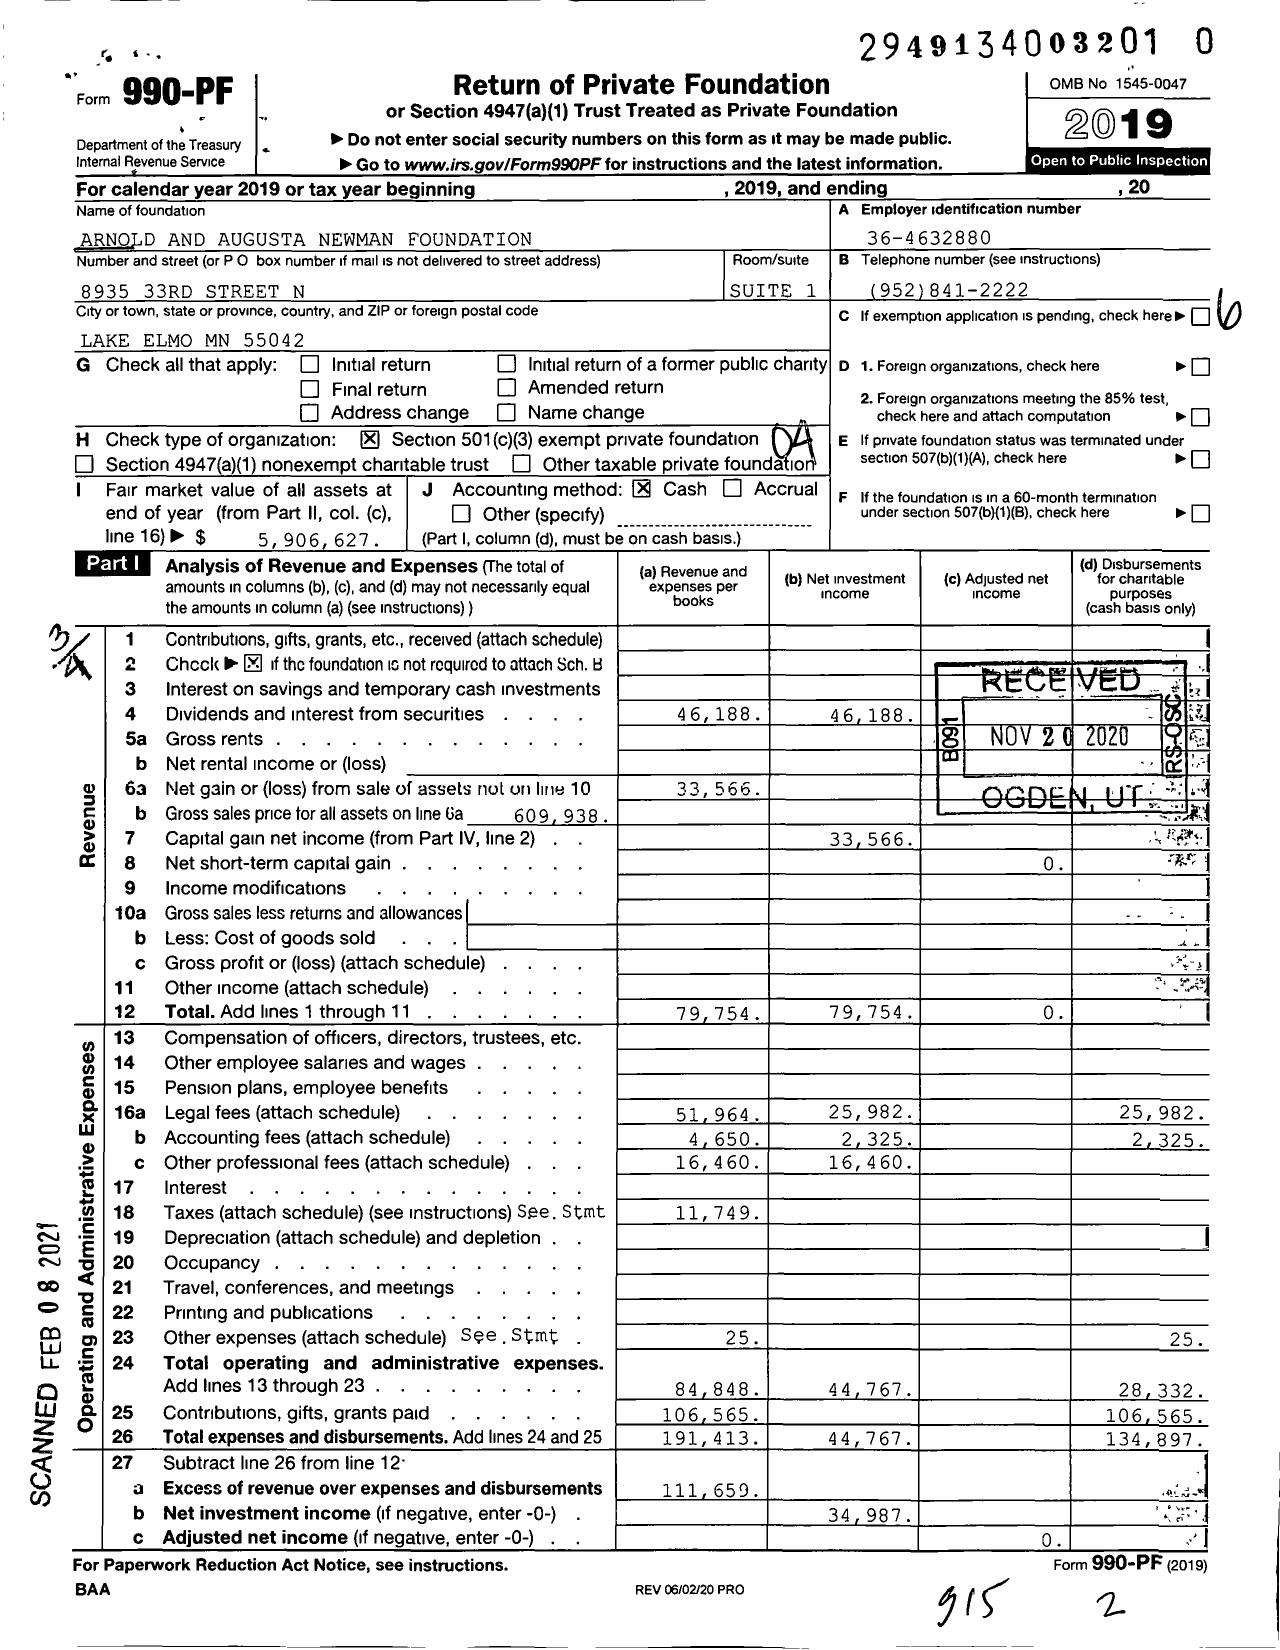 Image of first page of 2019 Form 990PF for Arnold and Augusta Newman Foundation